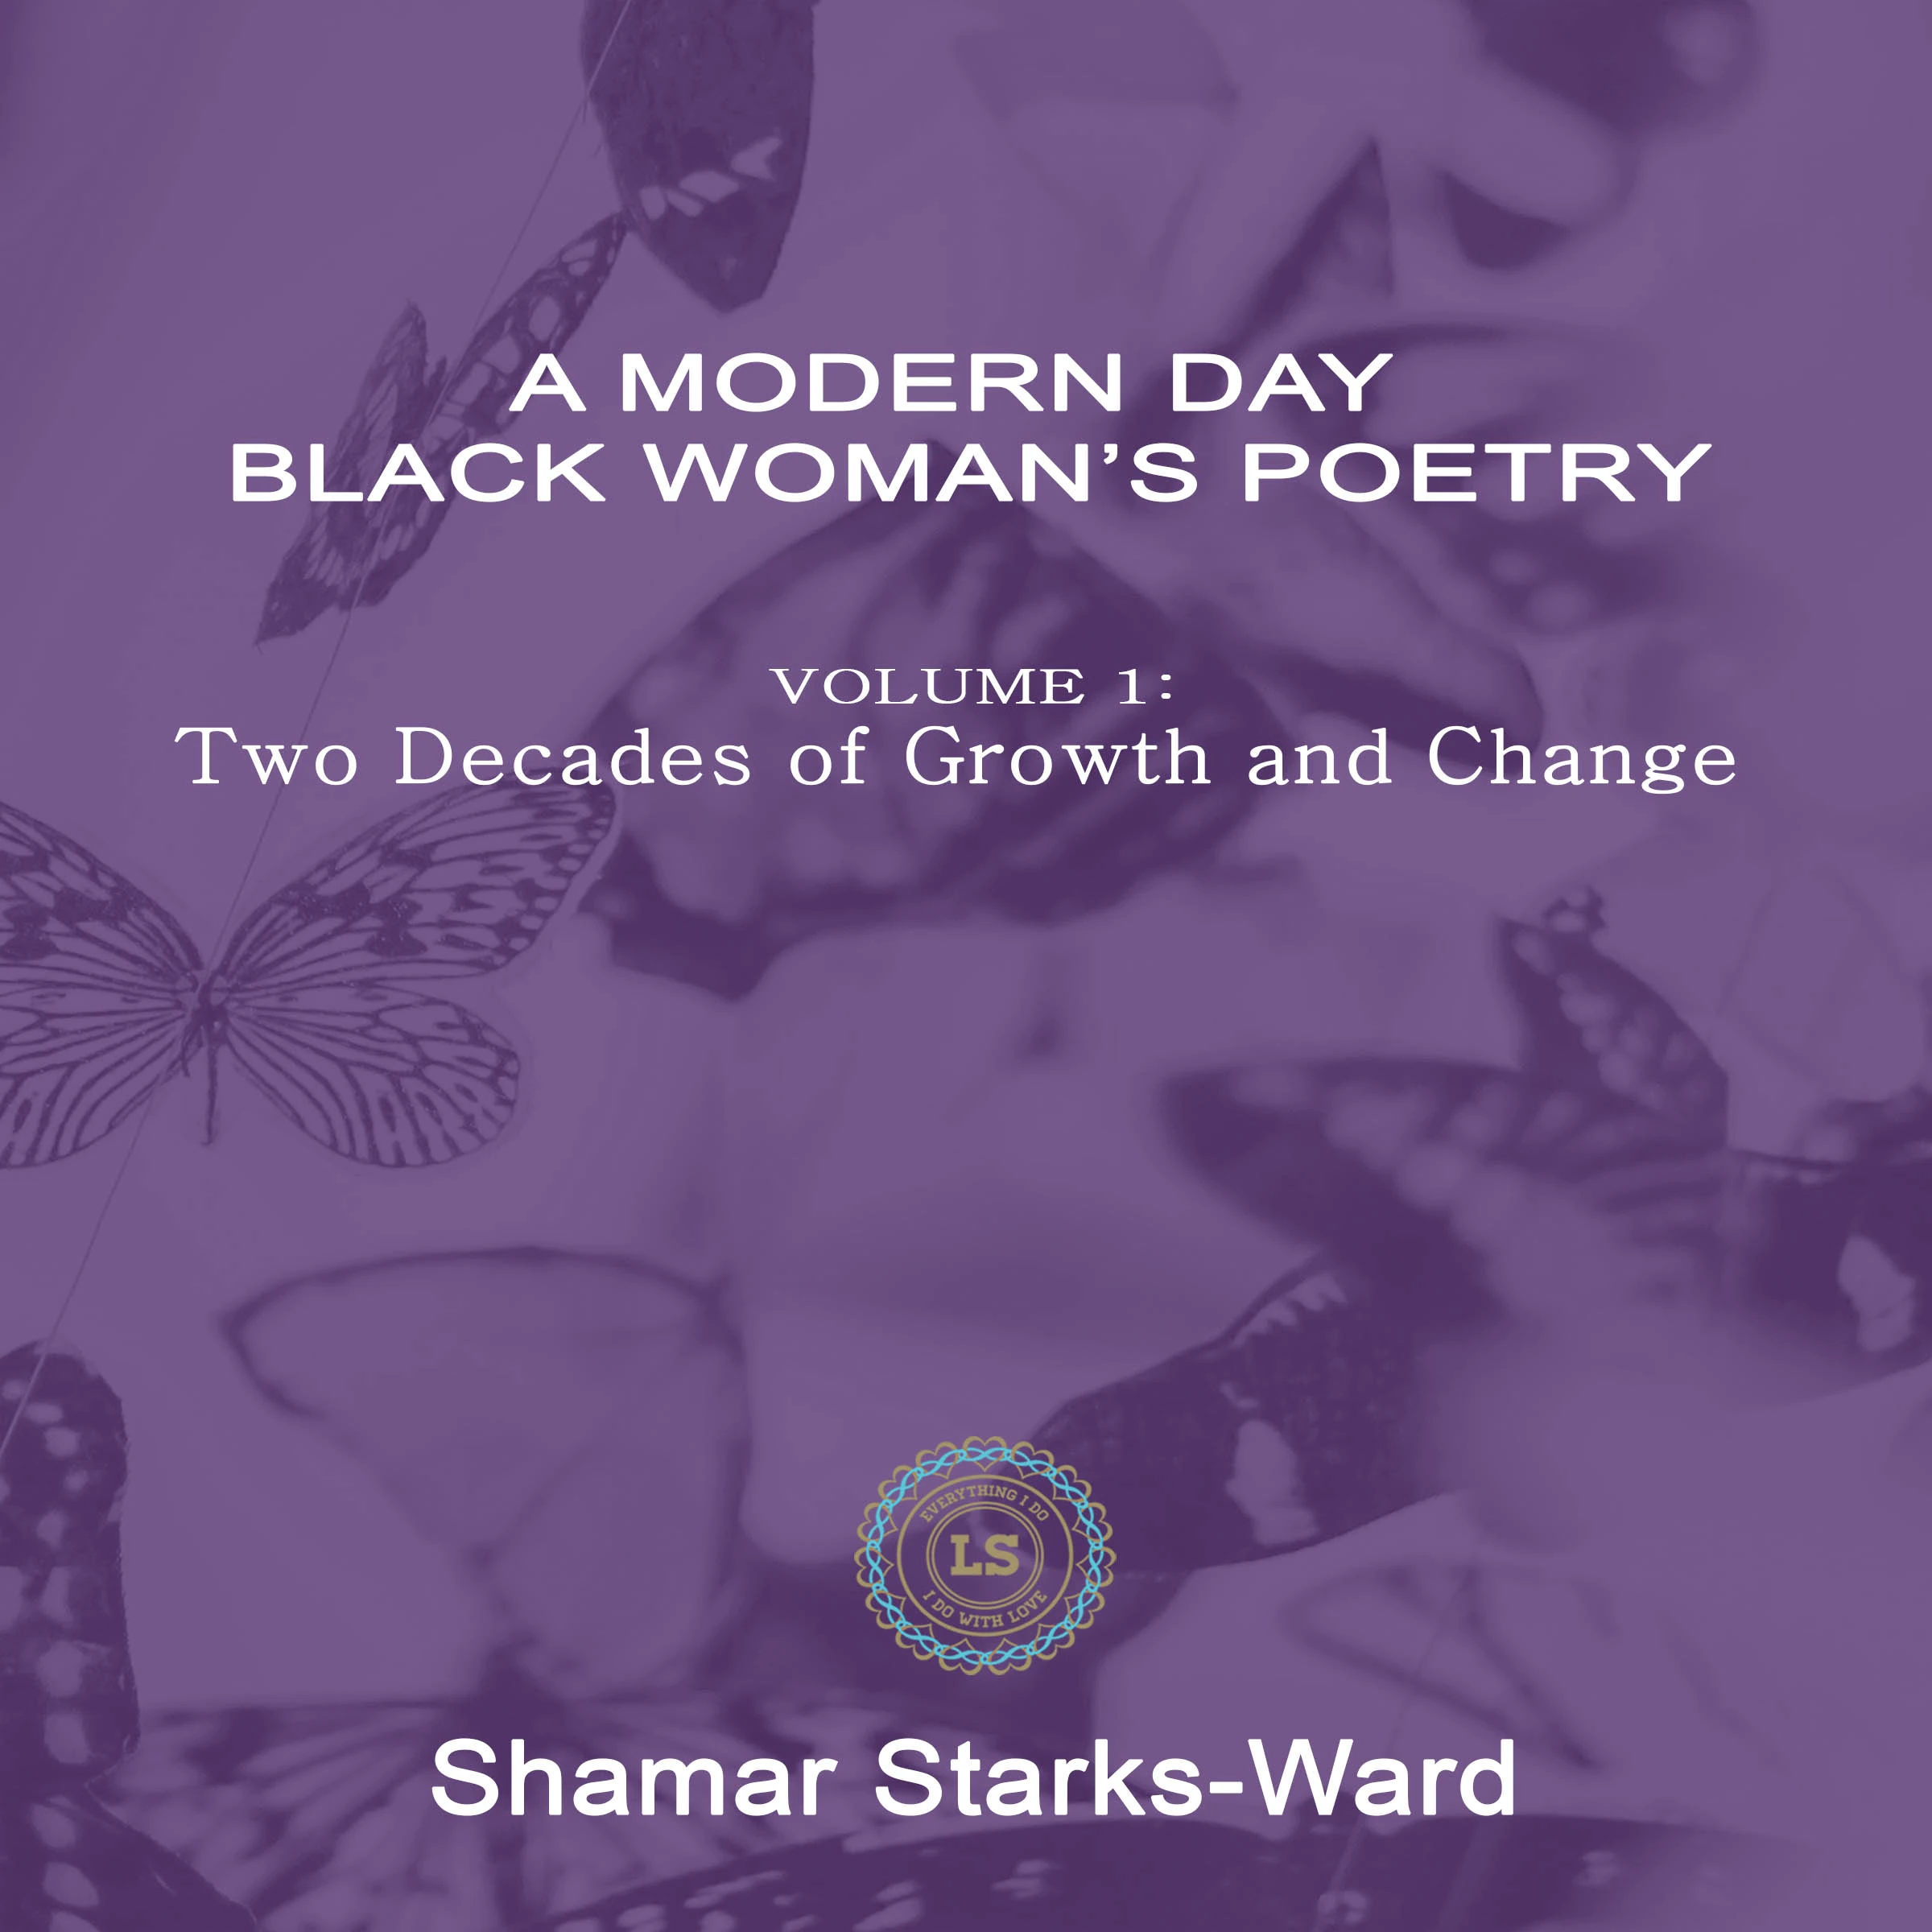 A Modern Day Black Woman's Poetry Volume 1: Two Decades of Growth and Change Audiobook by Shamar Starks-Ward